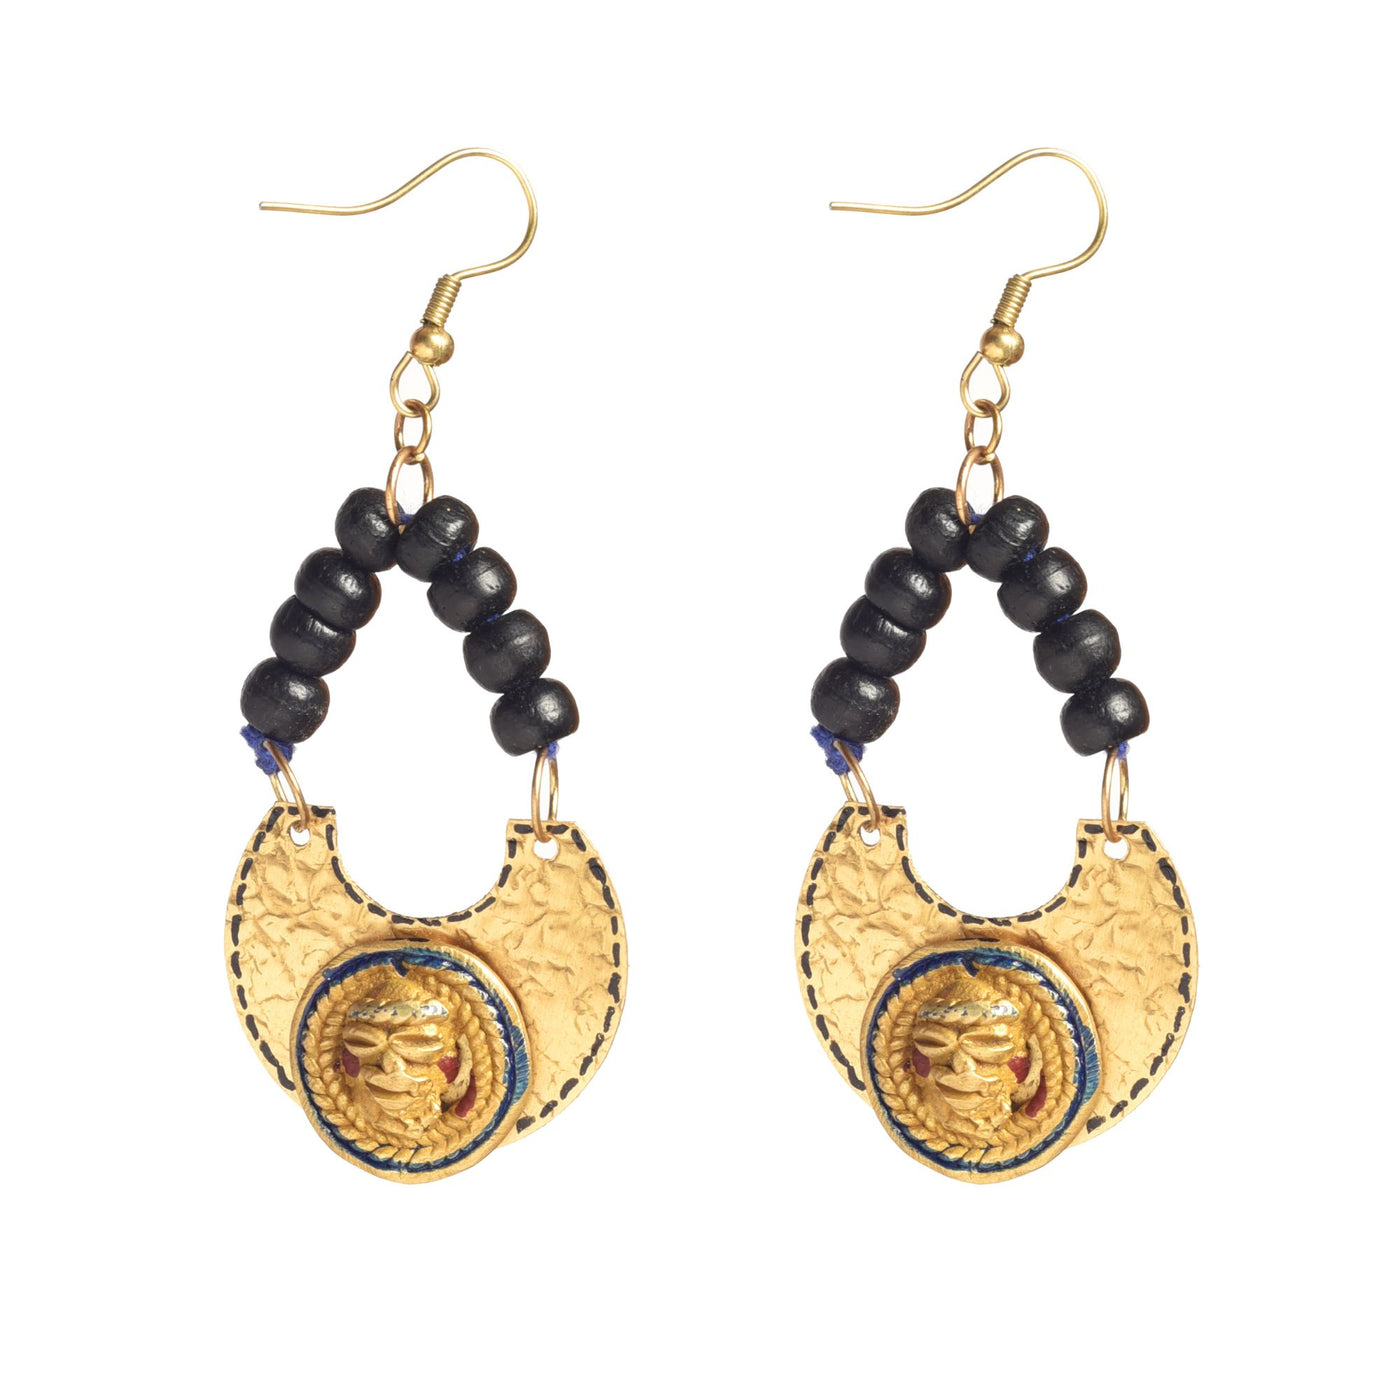 The Moon Queen Handcrafted Tribal Earrings - Fashion & Lifestyle - 2